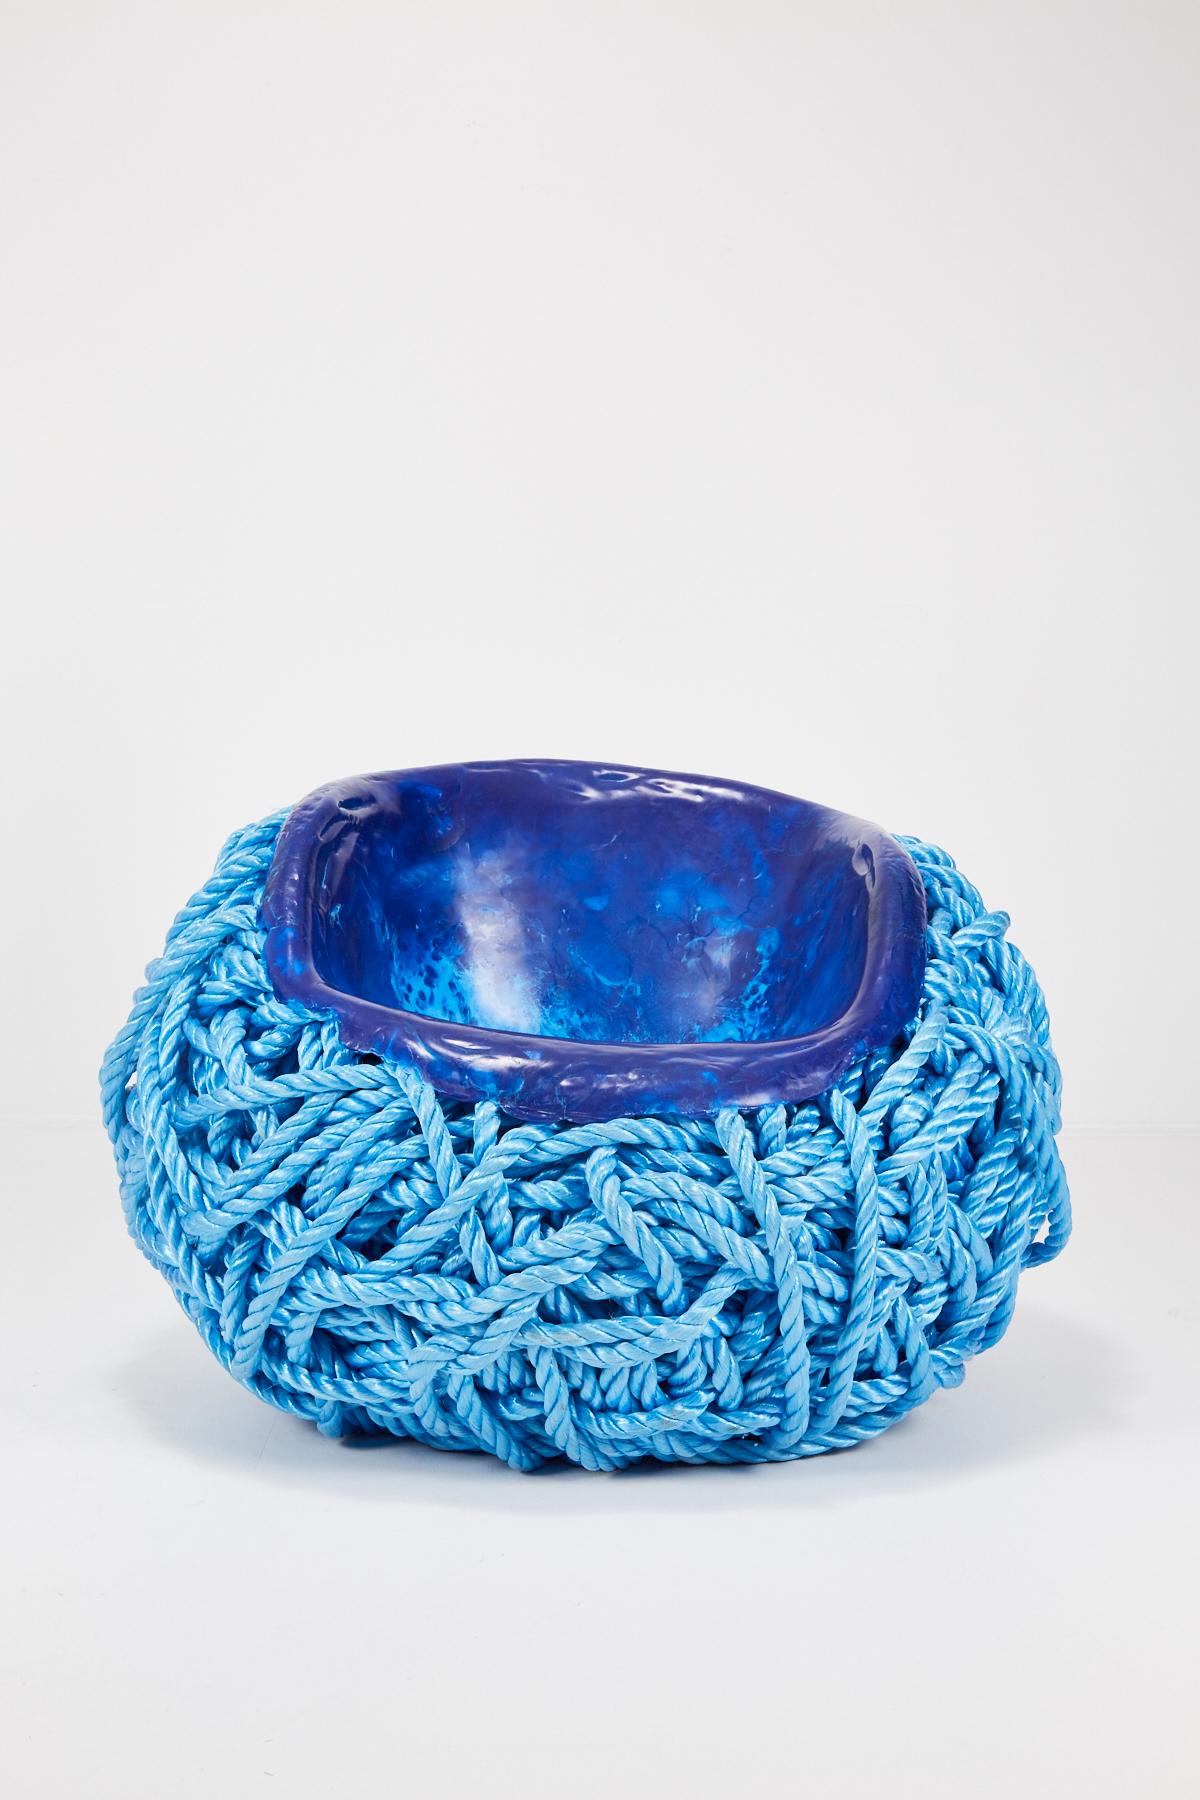 Meltdown chair: PP rope blue is created by heating and pressing a seat-shaped former into a ball of polypropylene rope (or nautical rope as used on boats). The rope begins to liquefy as it comes into contact with the heated former and, as it cools,